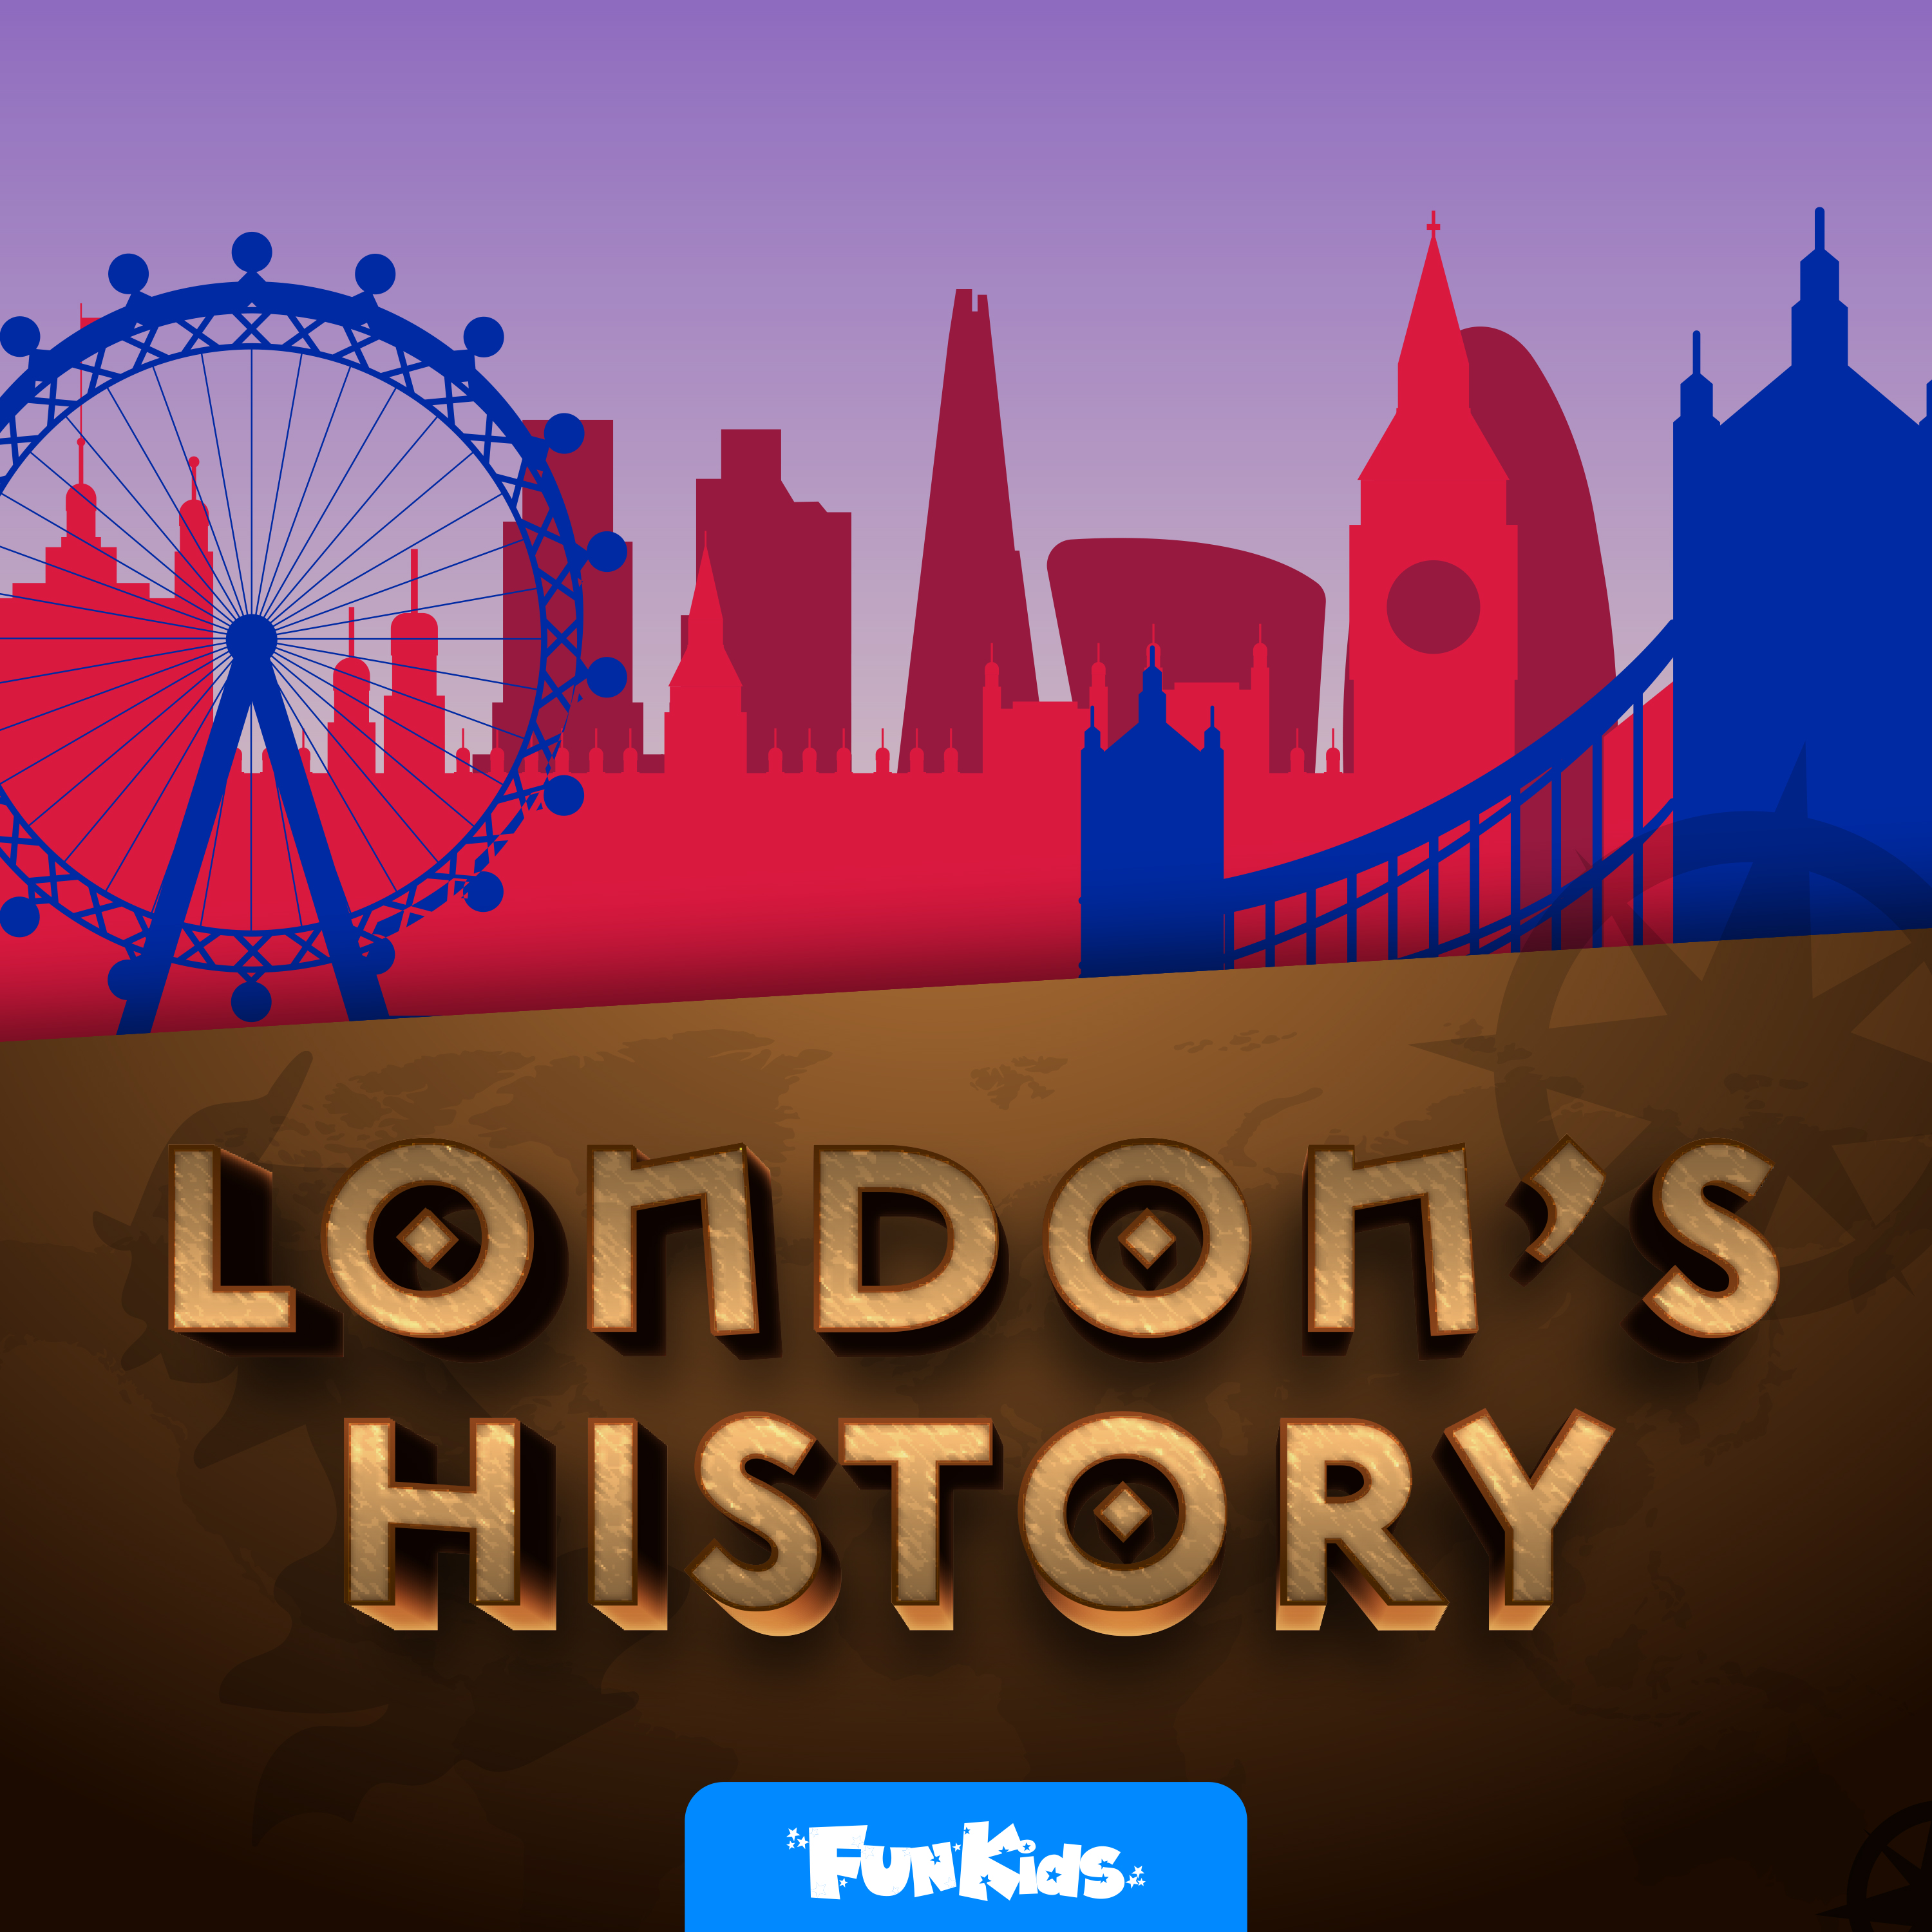 Lost Rivers (London's History)